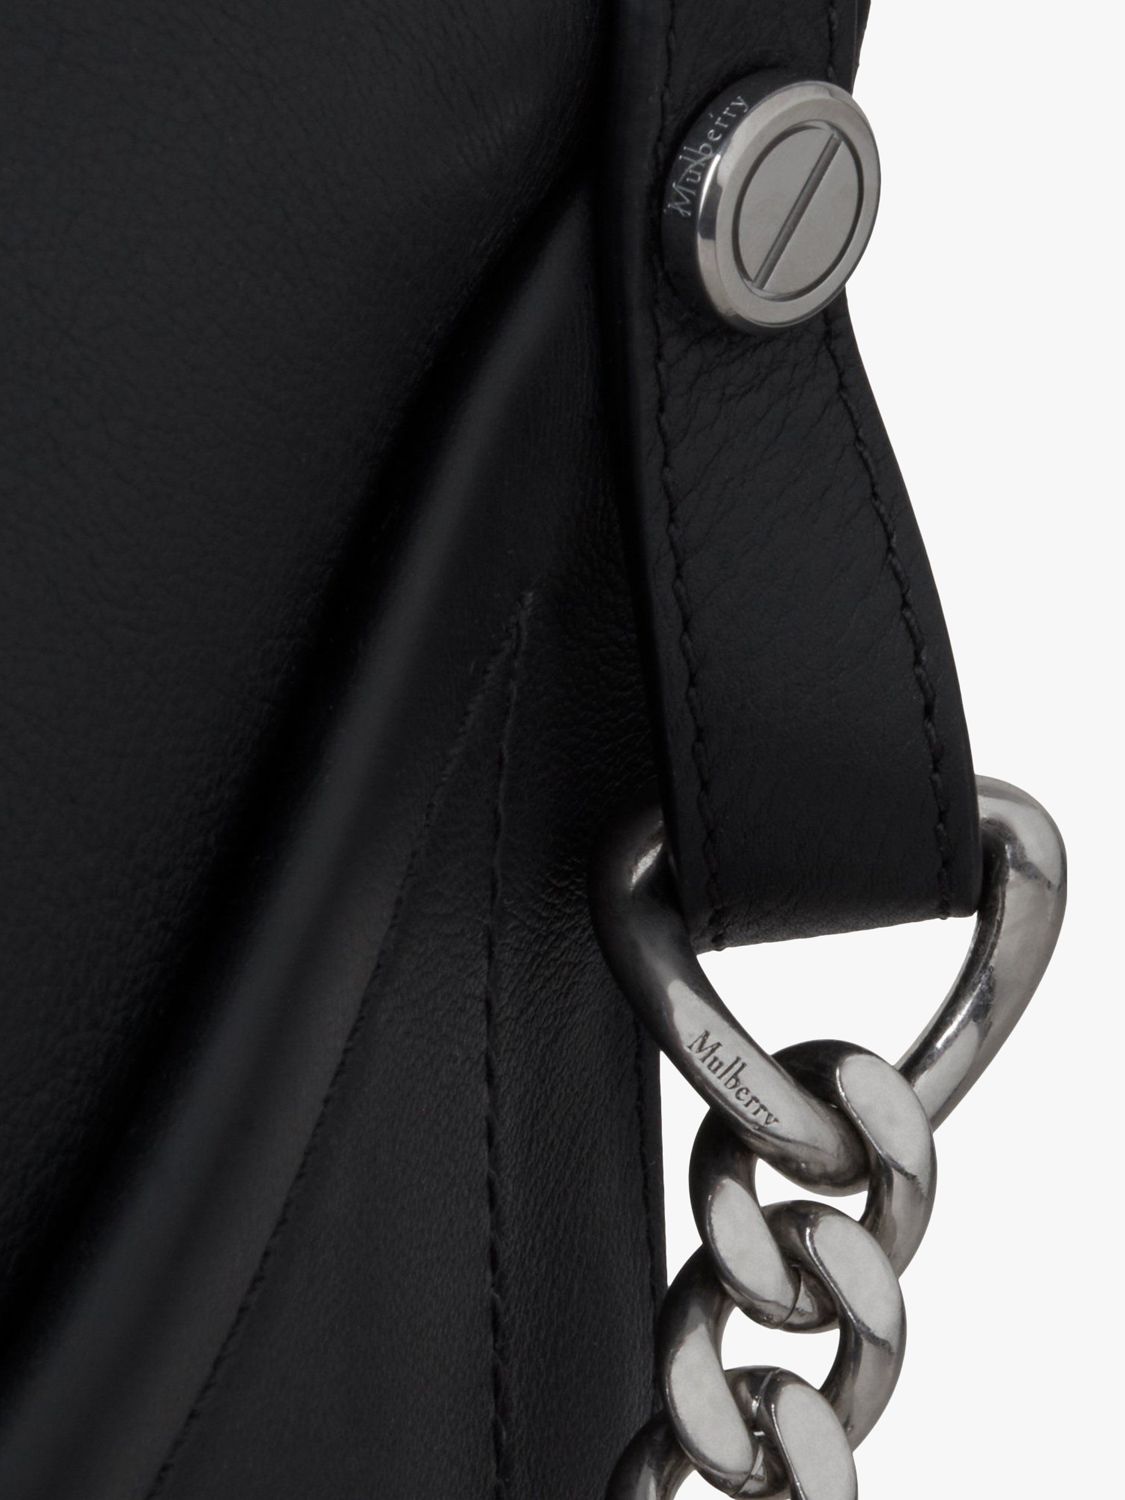 Mulberry M Zipped Matte Smooth Calf Leather Bag, Black at John Lewis ...